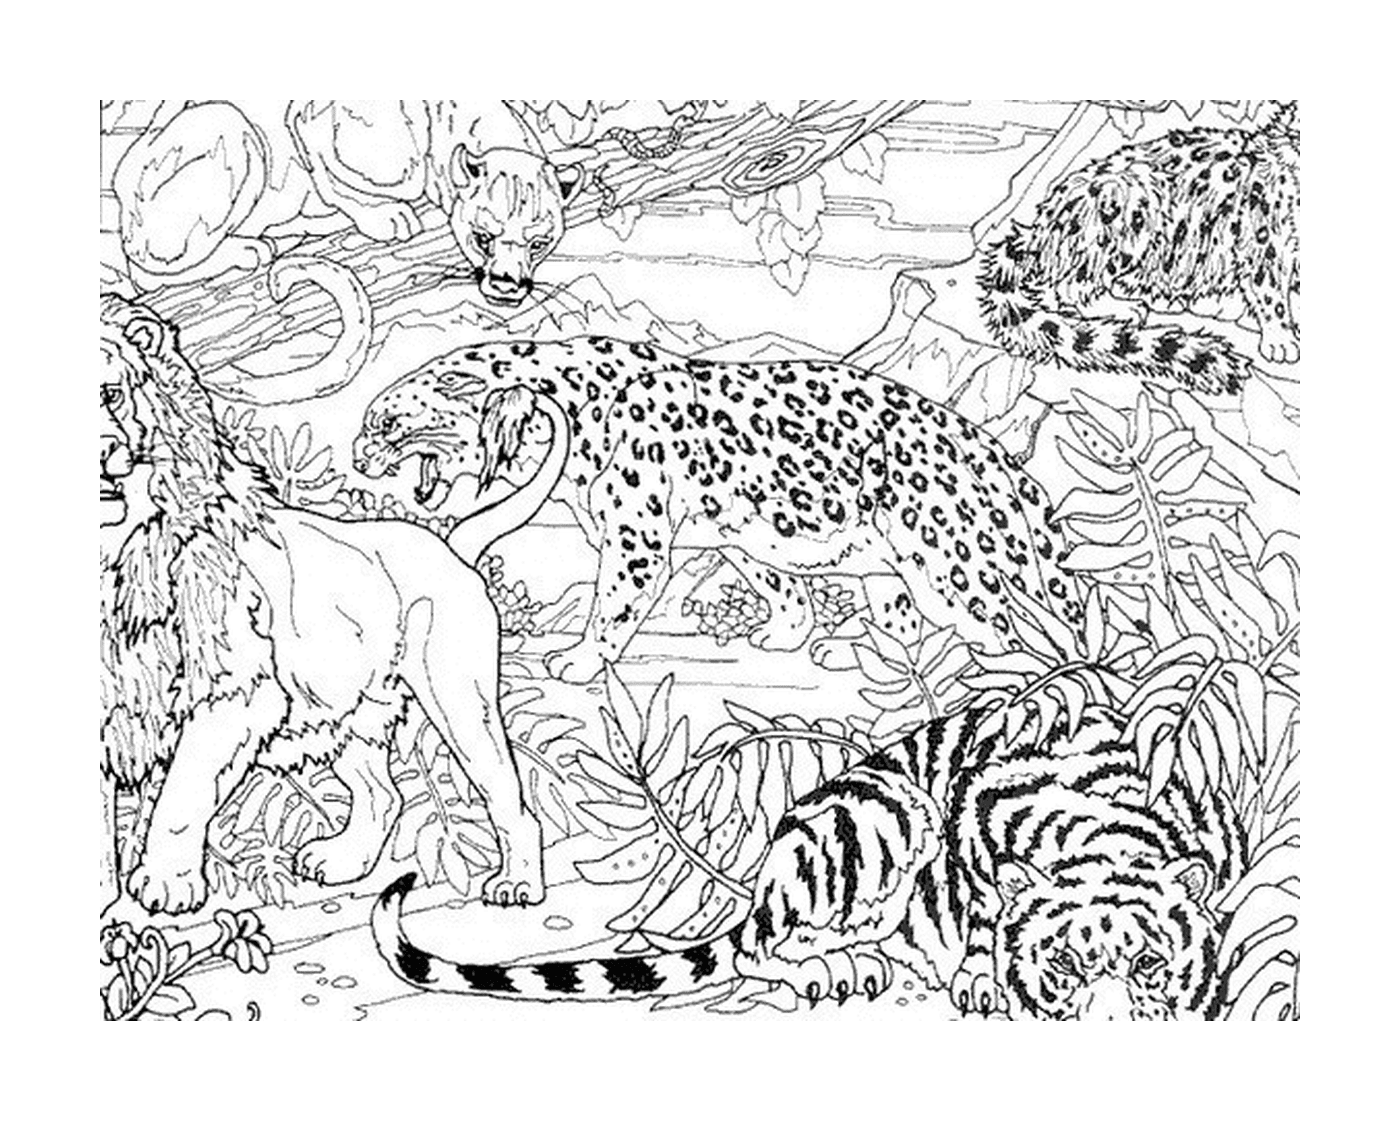  A leopard and two tigers in the jungle 